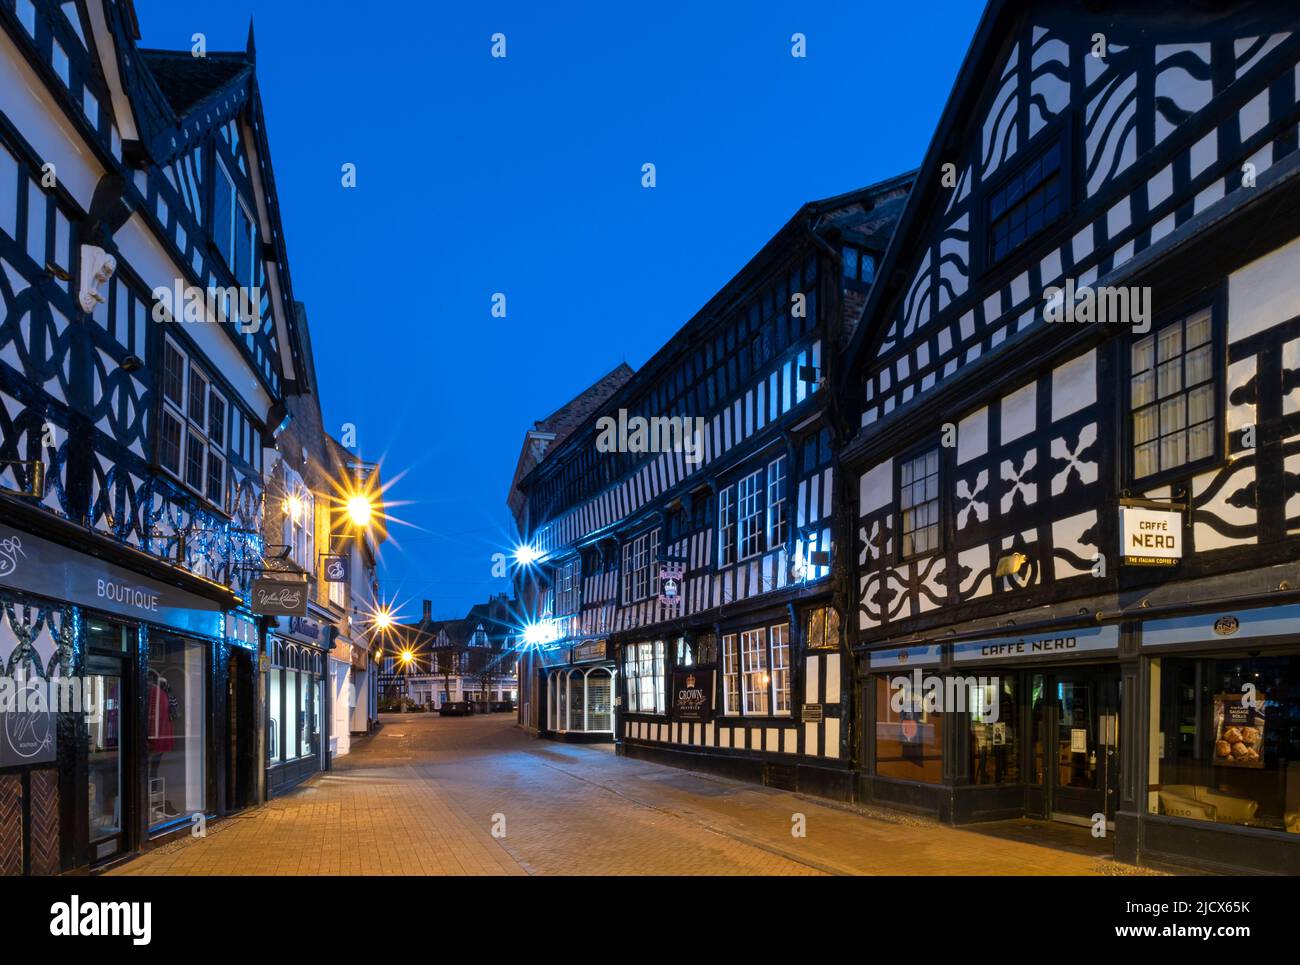 The 16th century Crown Inn and Medieval buildings at night, High Street, Nantwich, Cheshire, England, United Kingdom, Europe Stock Photo